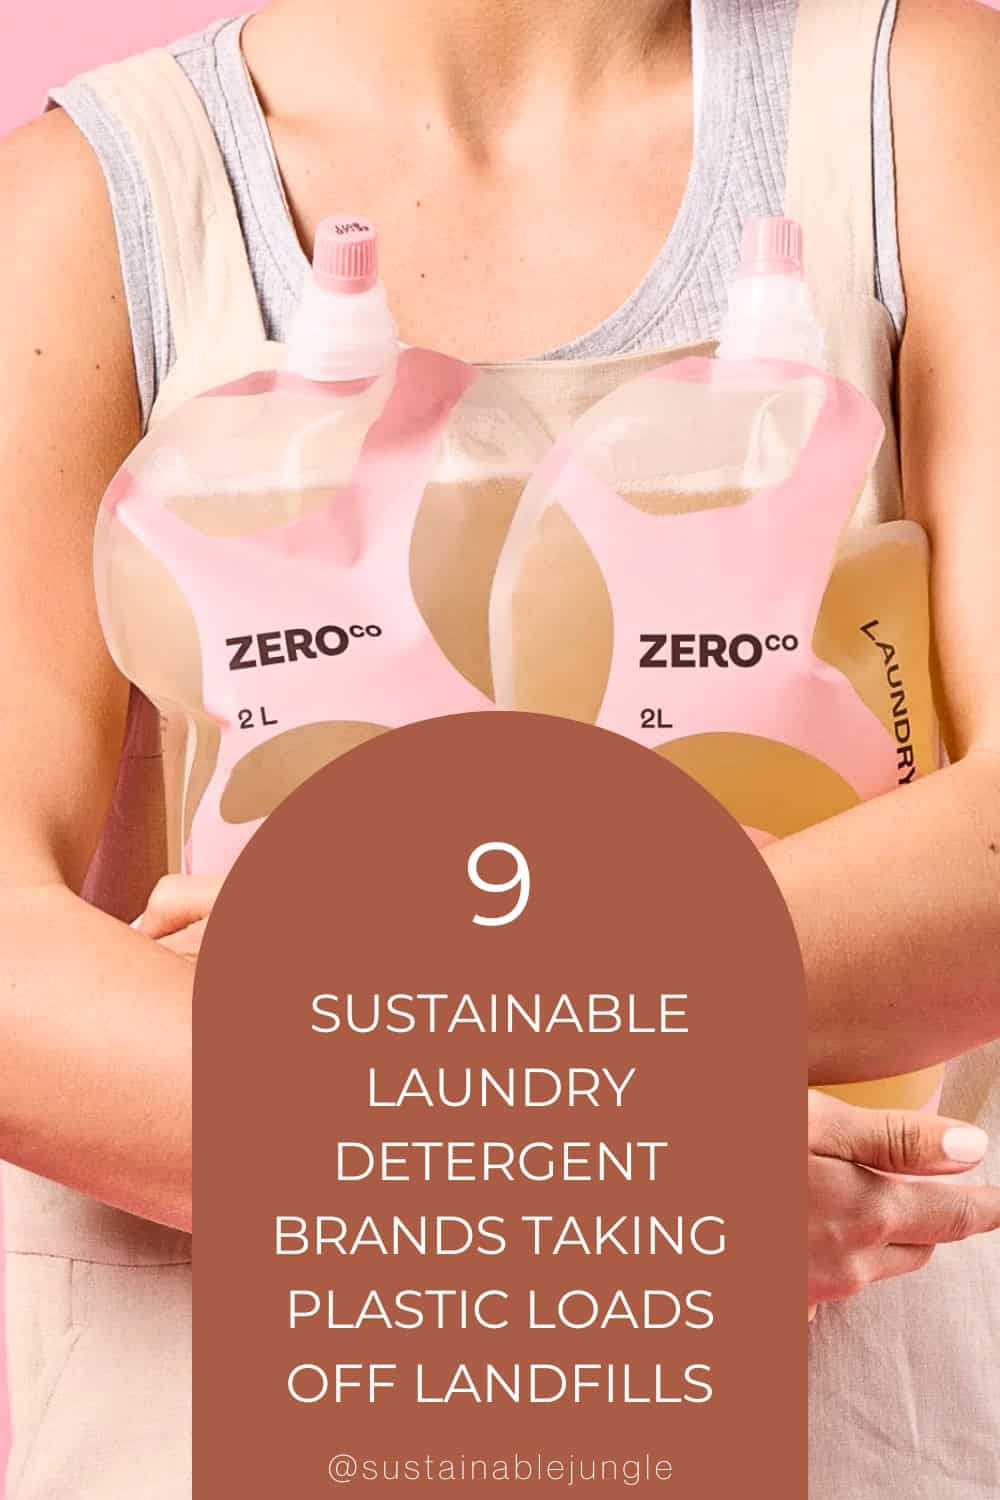 9 Sustainable Laundry Detergent Brands Taking Plastic Loads Off Landfills Image by Zero Co #sustainablelaundrydetergent #bestsustainablelaundrydetergent #zerowastelaundrydetergent #plasticfreelaundrydetergent #PVAfreelaundrydetergent #zerowastedetergent #sustainablejungle